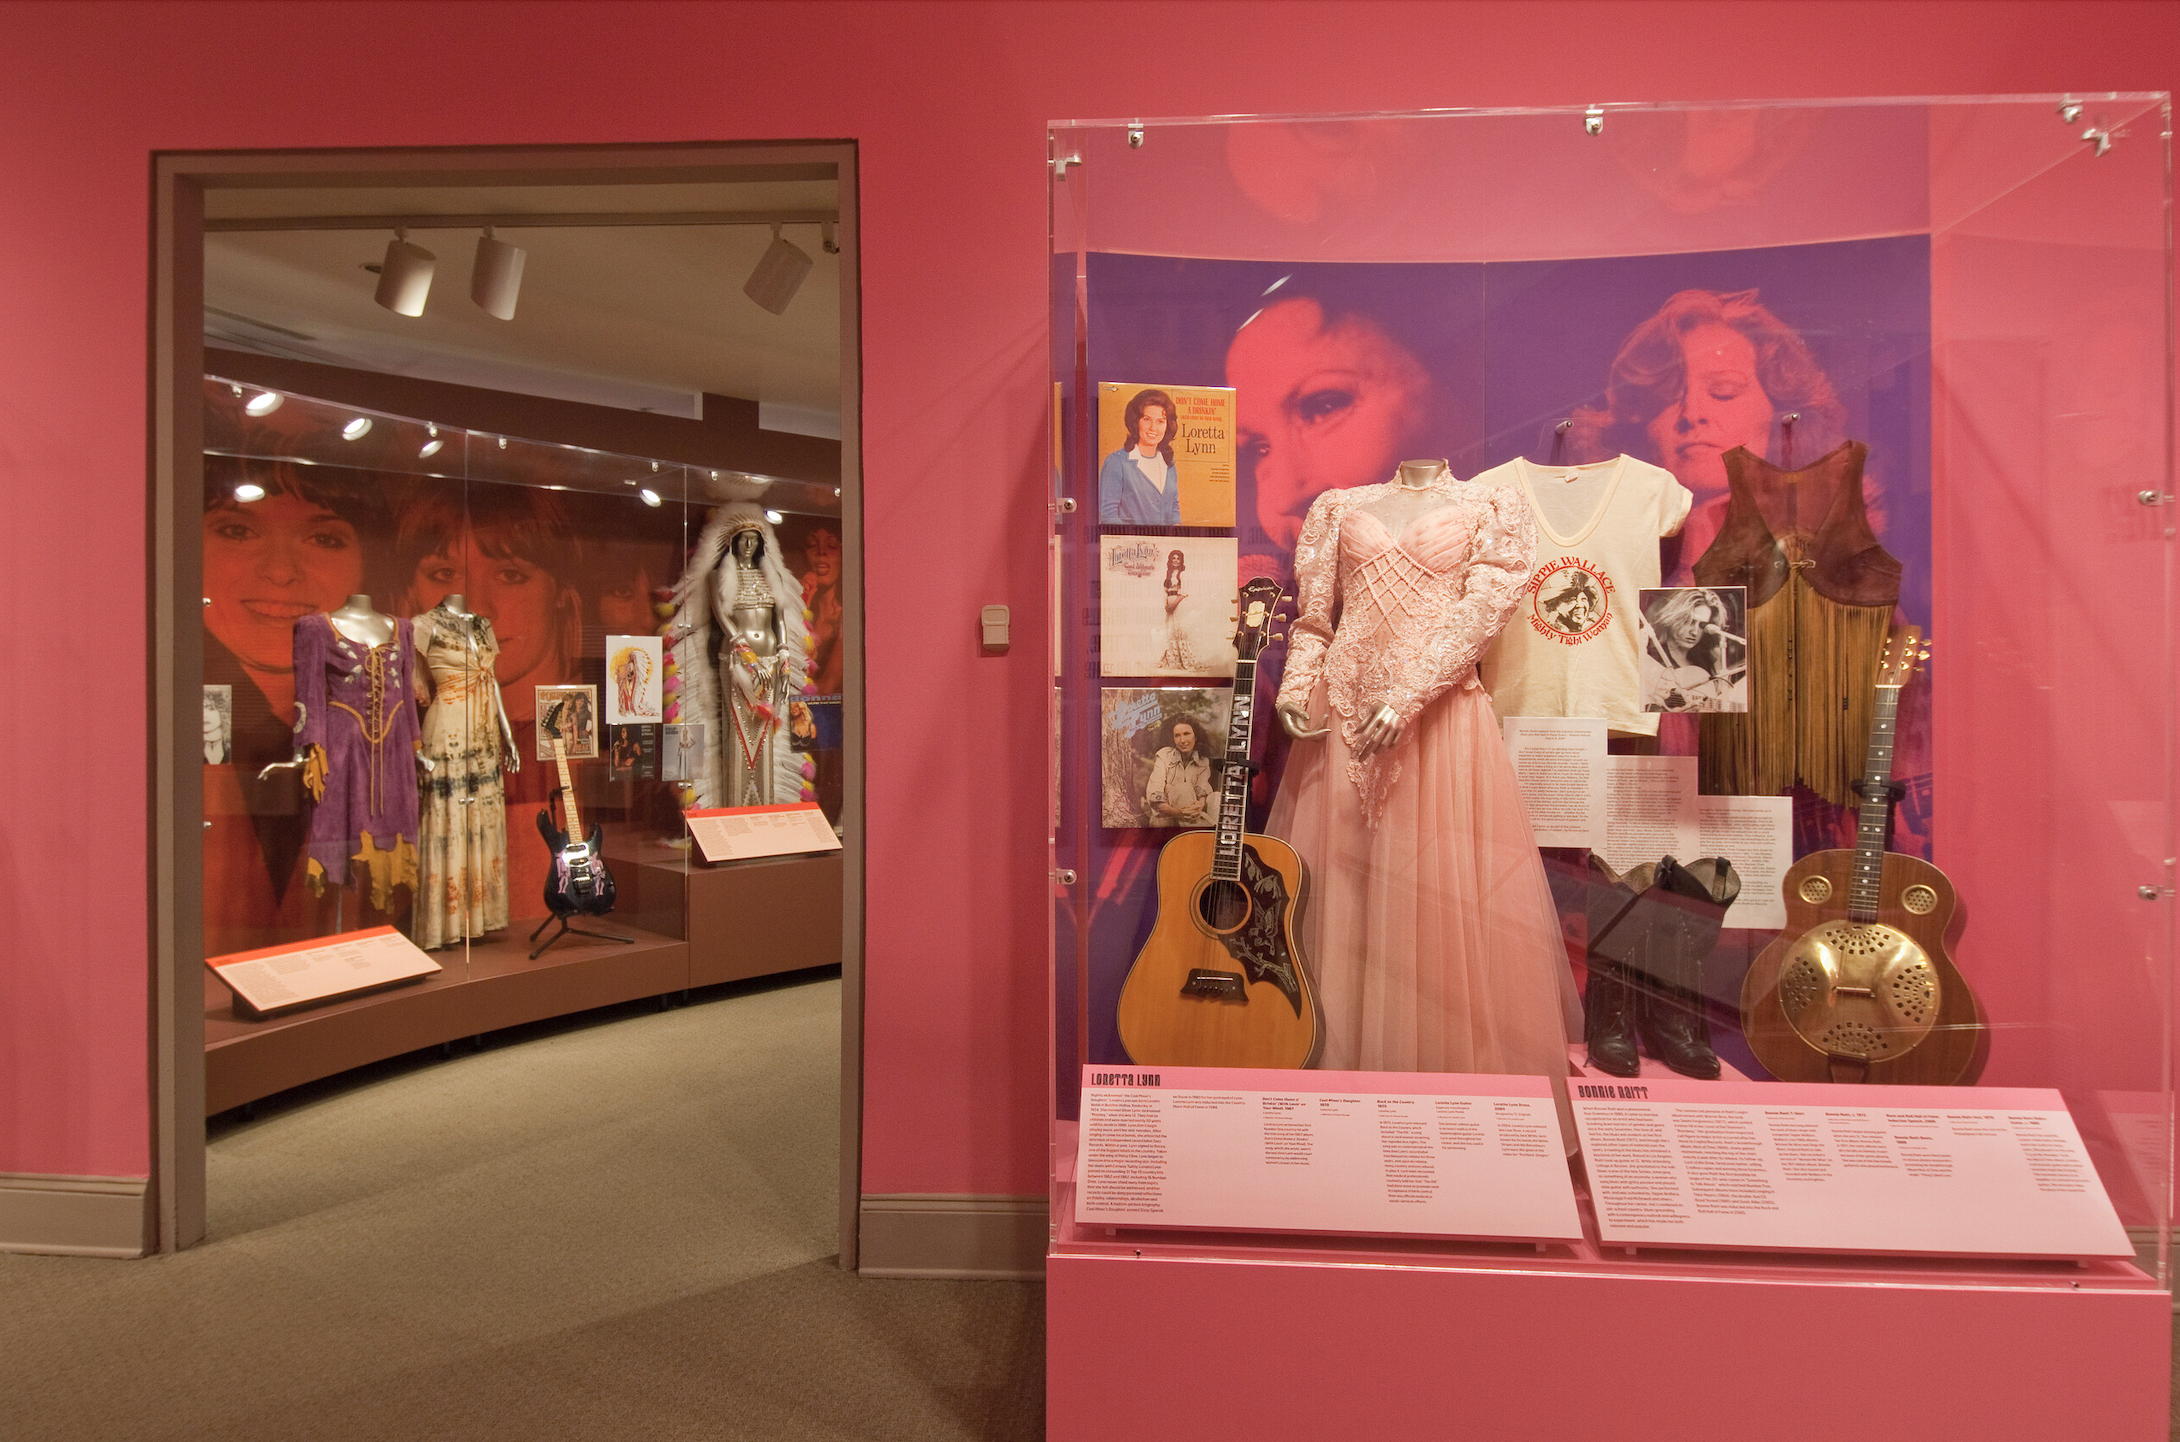 A view into a gallery space with pink walls and glass cases including guitars, women’s country western outfits, and records picturing women.